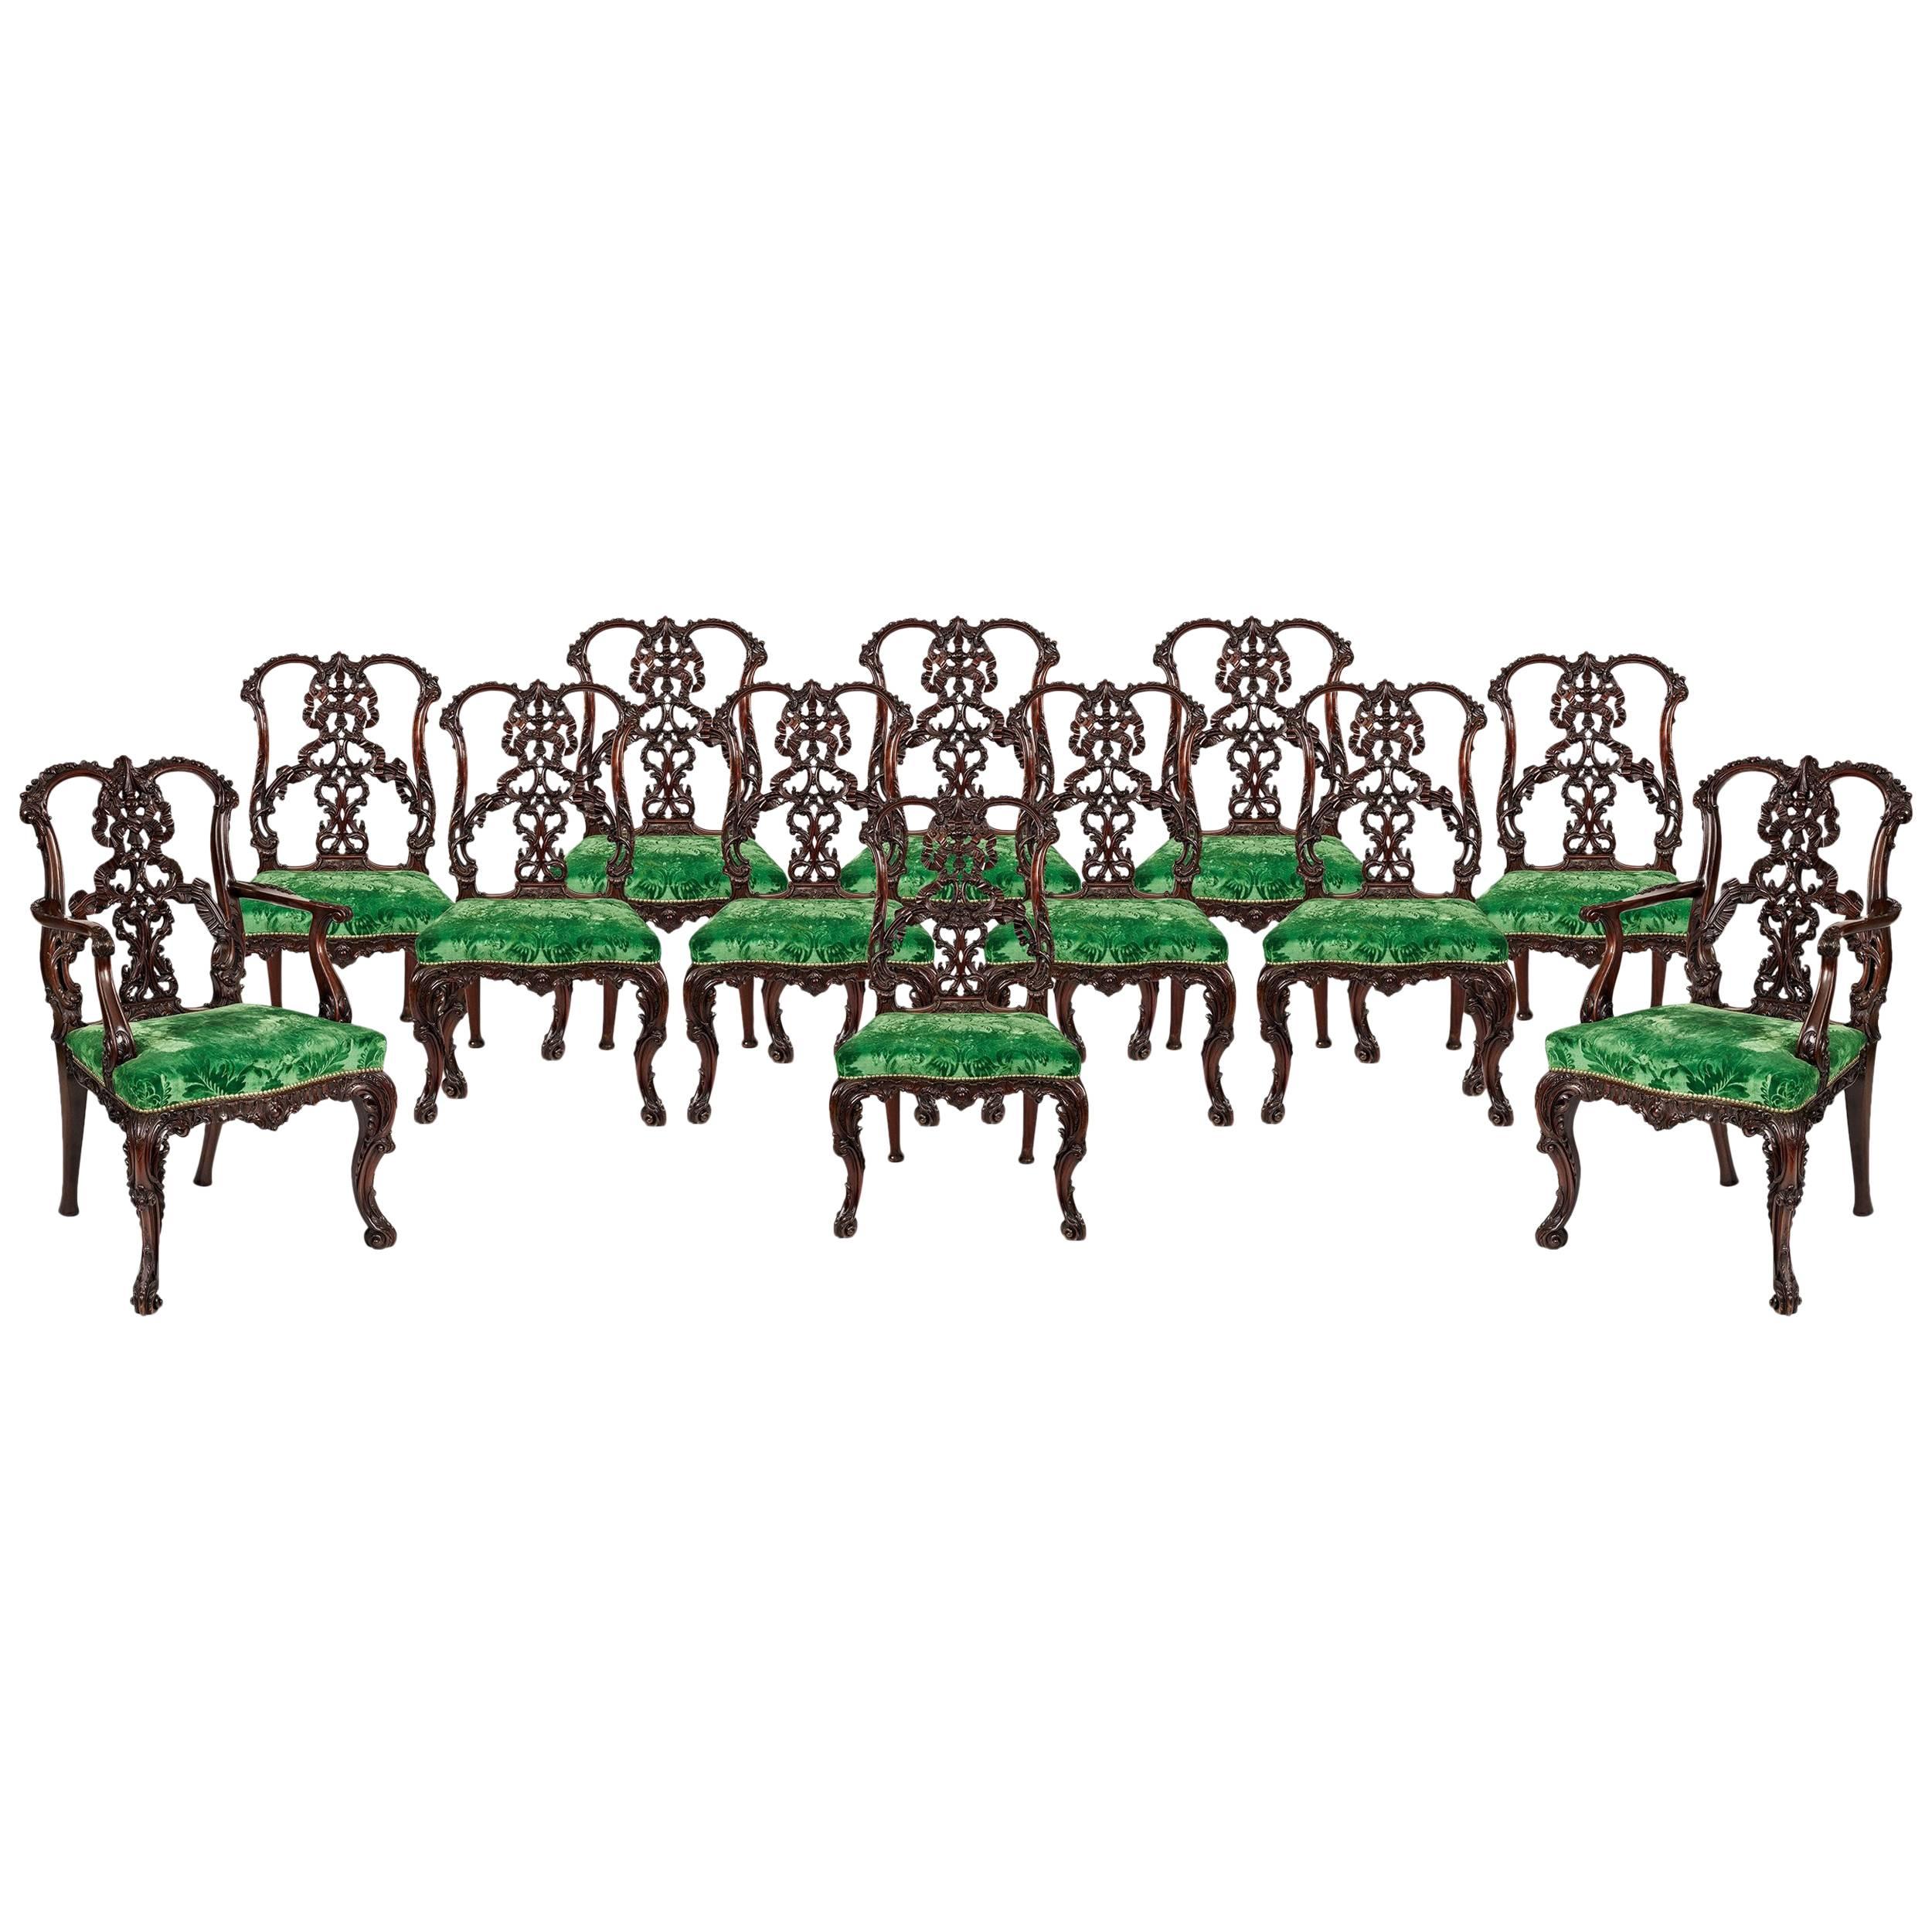 Set of 12 Carved Mahogany Dining Chairs in the Manner of Thomas Chippendale